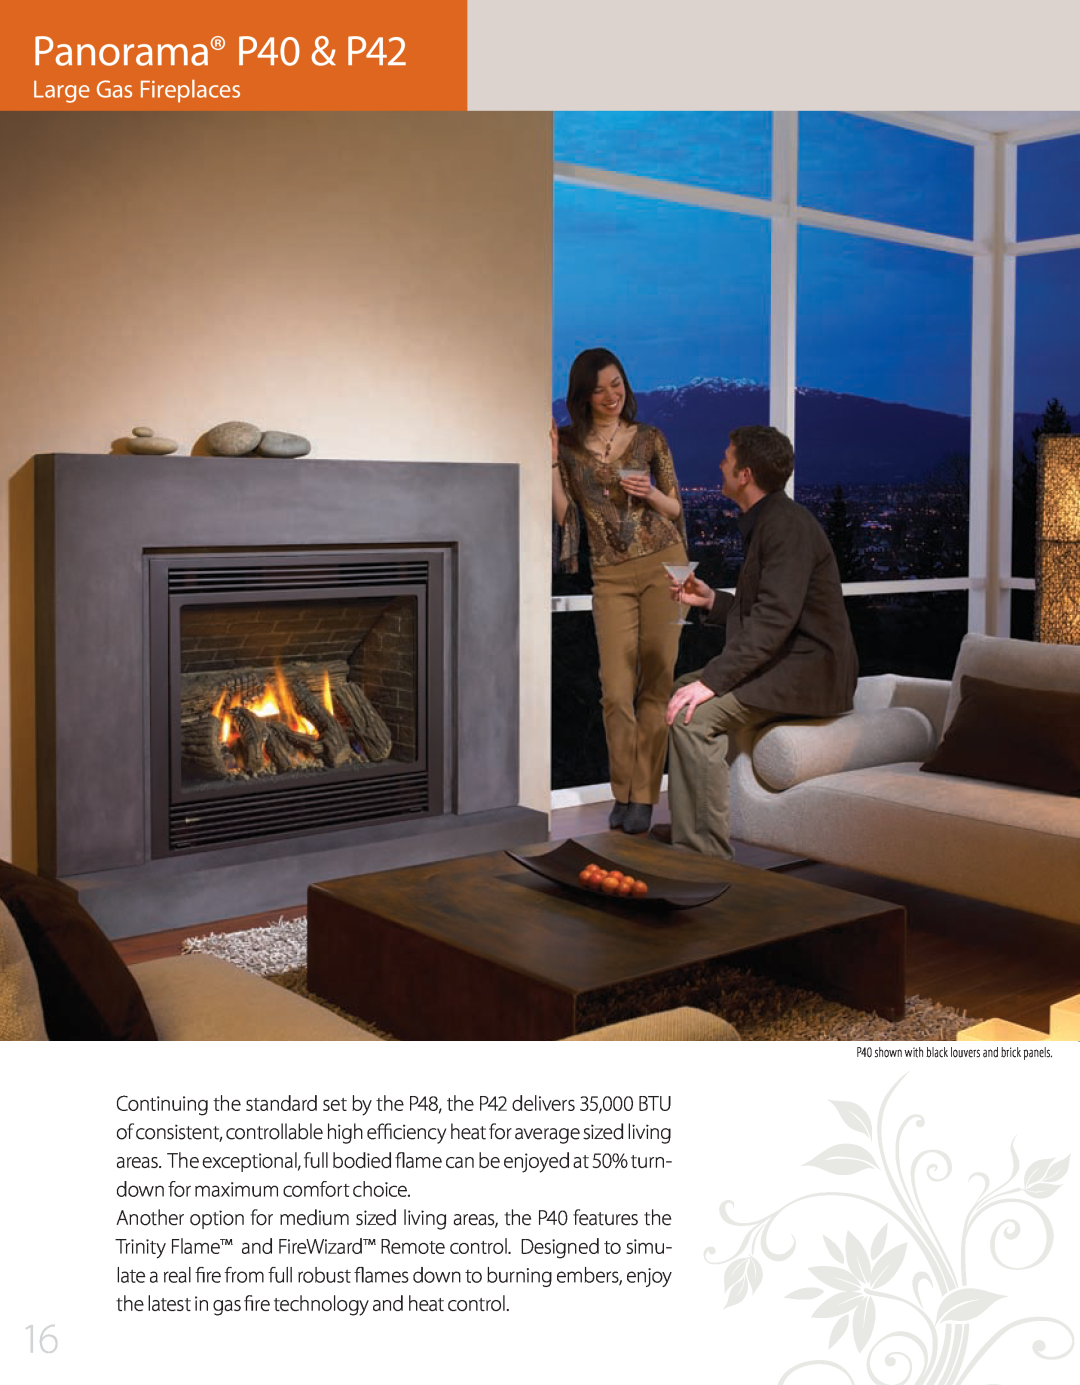 Regency L676S, P90, P95, P48, P36D, P33S manual Panorama P40 & P42, Large Gas Fireplaces 